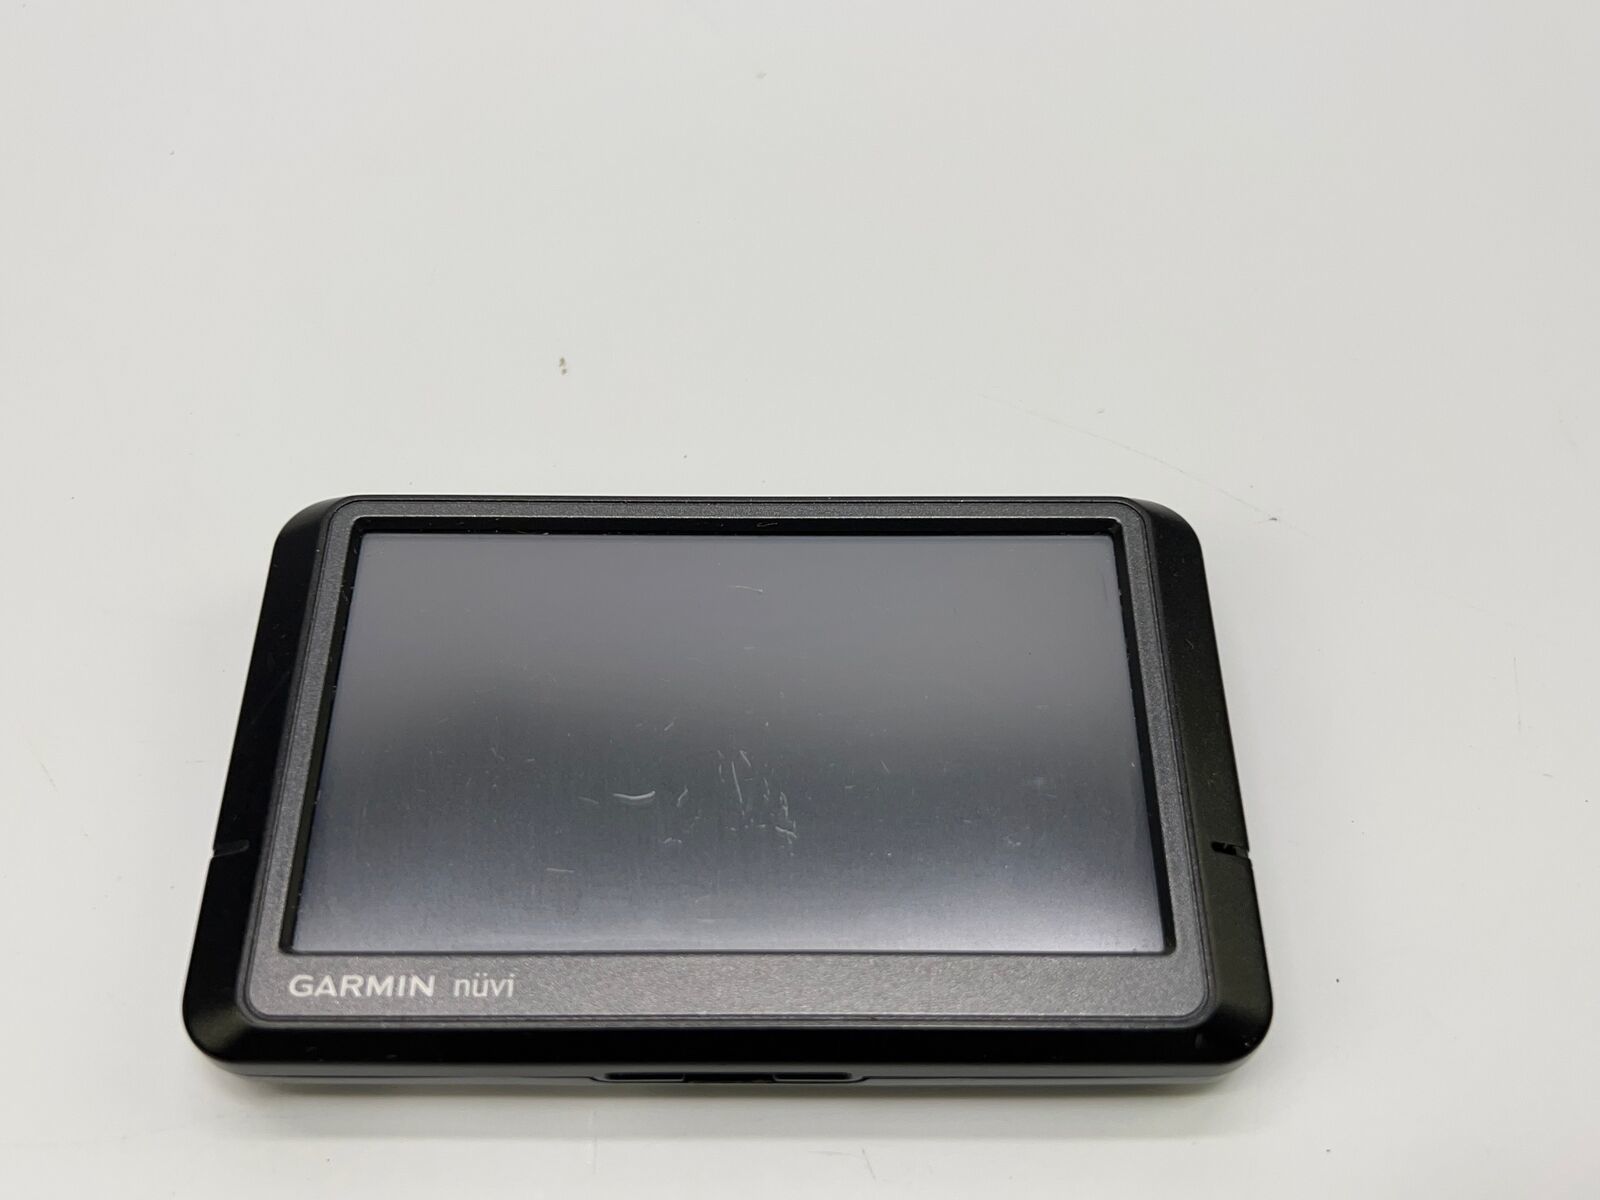 Primary image for Garmin Nuvi 255W  Touchscreen GPS Navigation Unit ONLY Tested